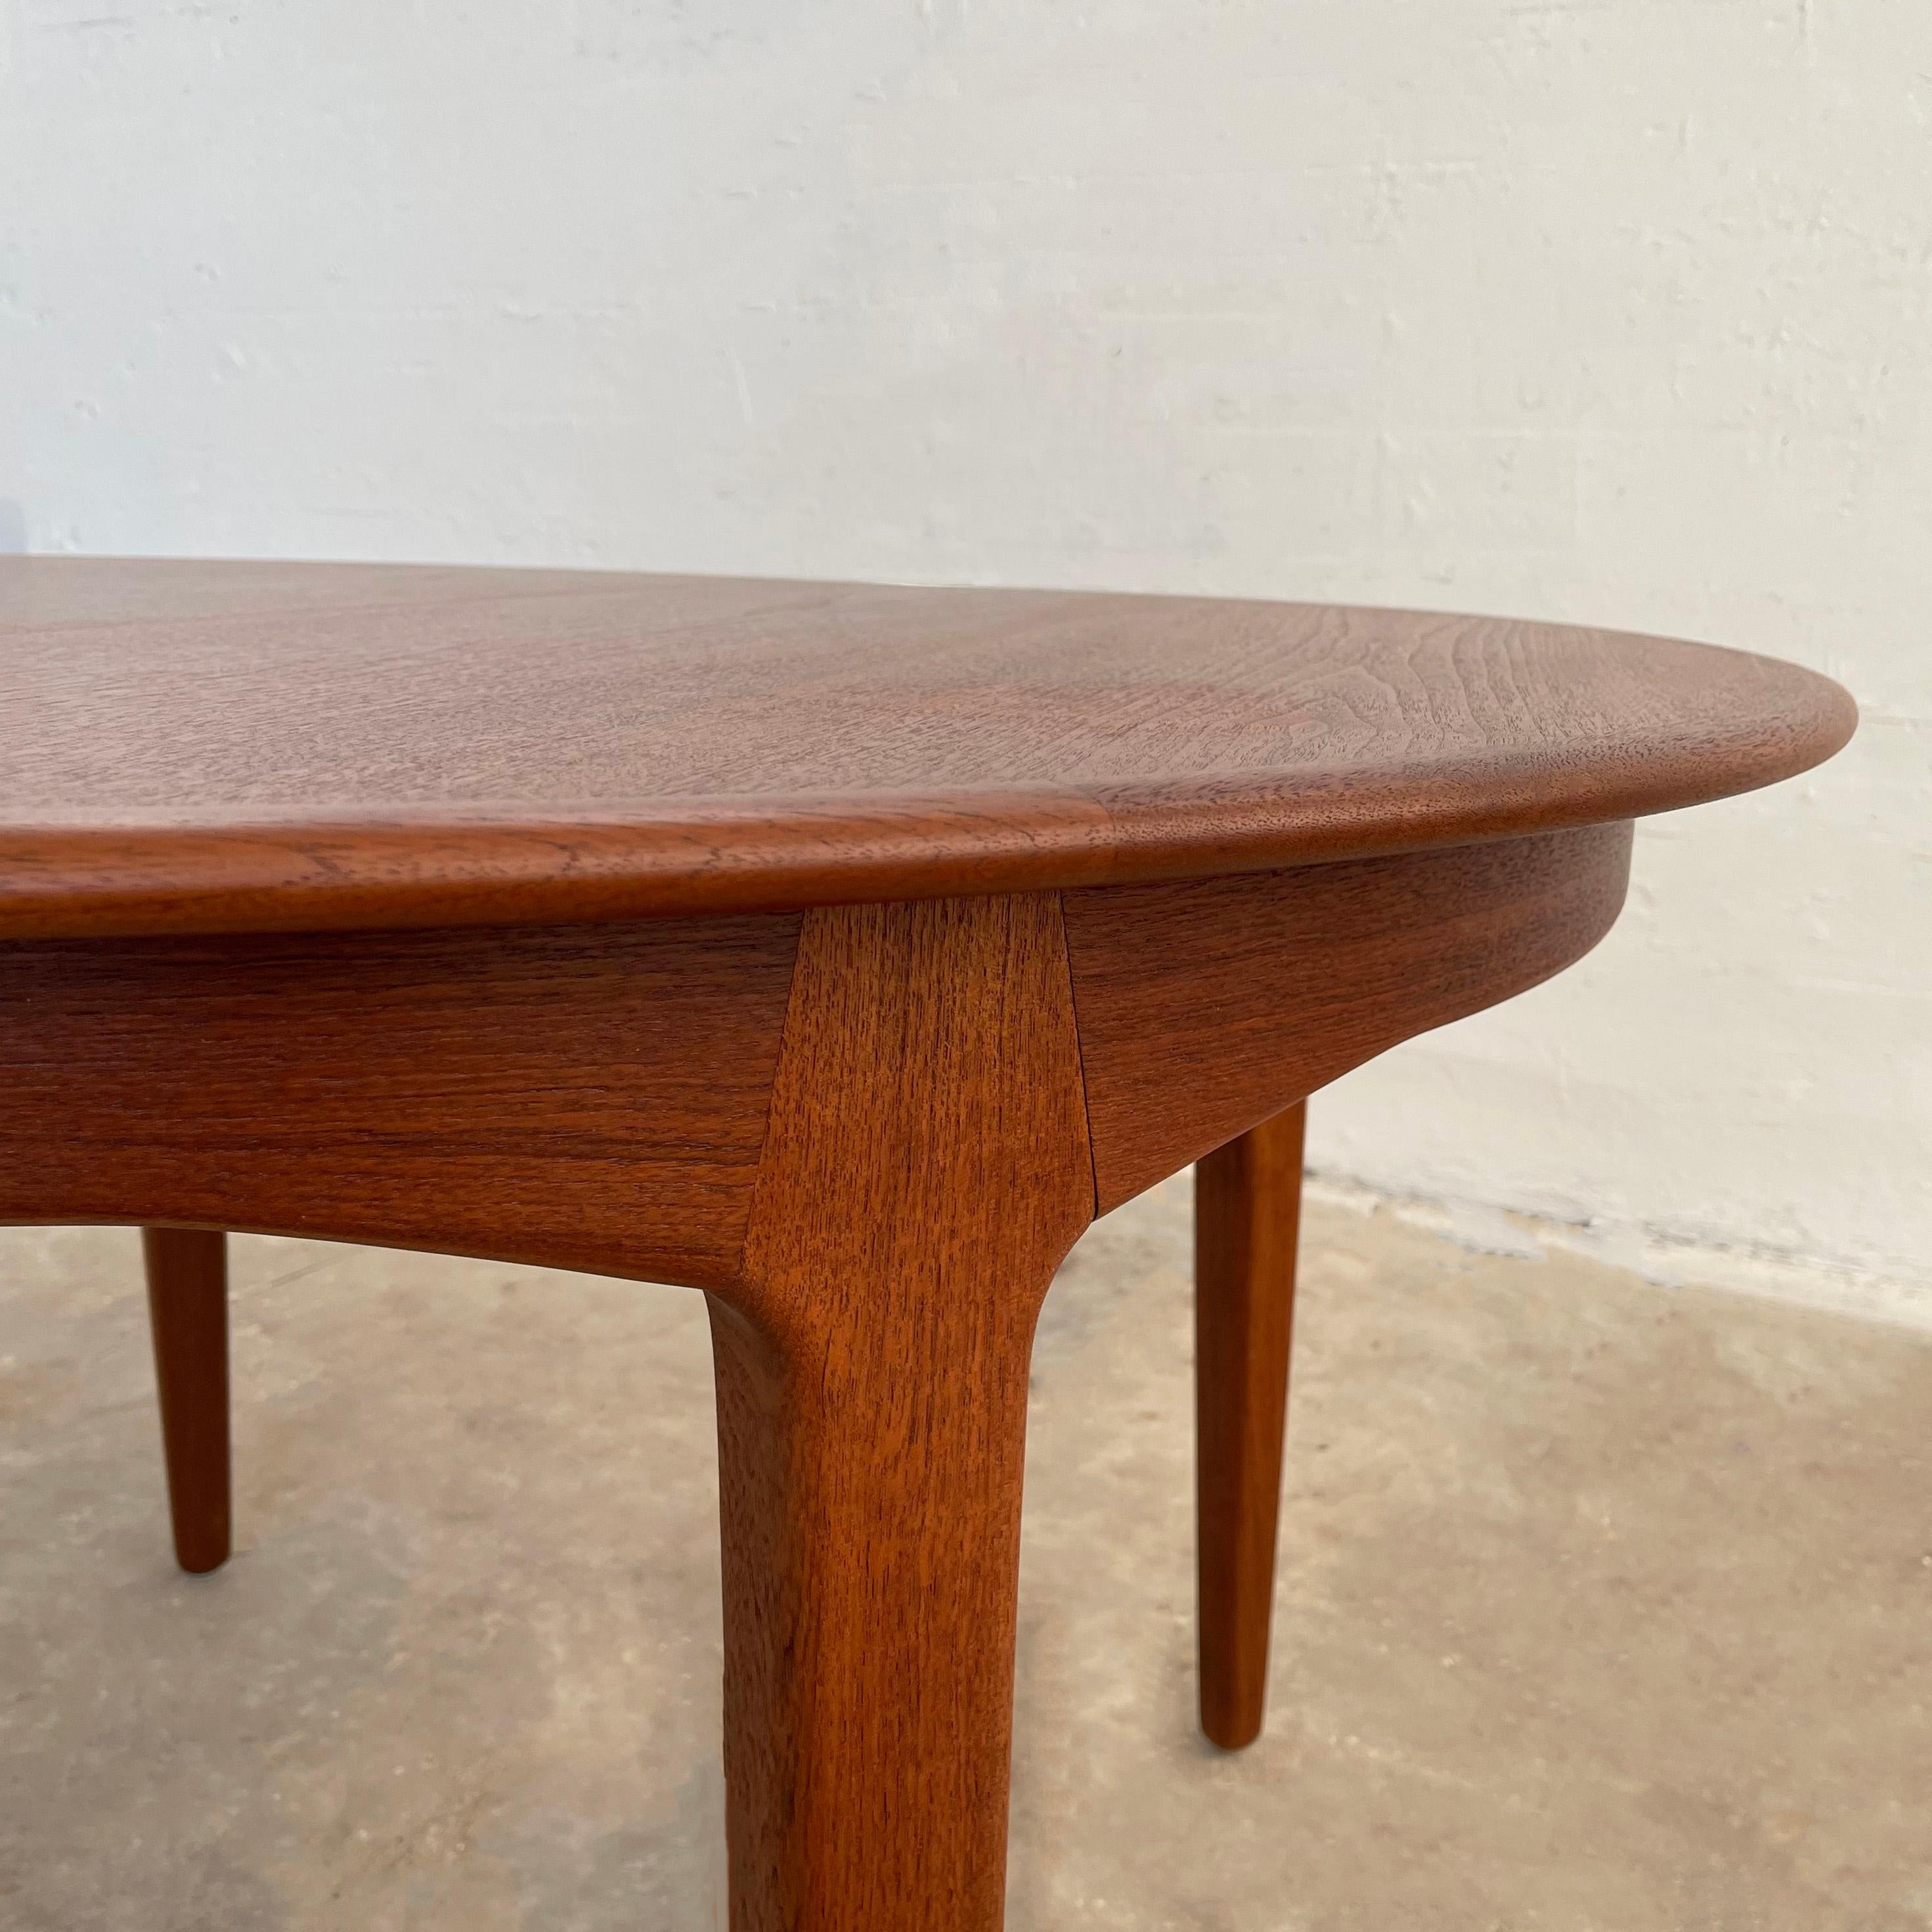 20th Century Round Teak Extension Dining Table By Henning Kjaernulf For Soro Stole, Denmark For Sale